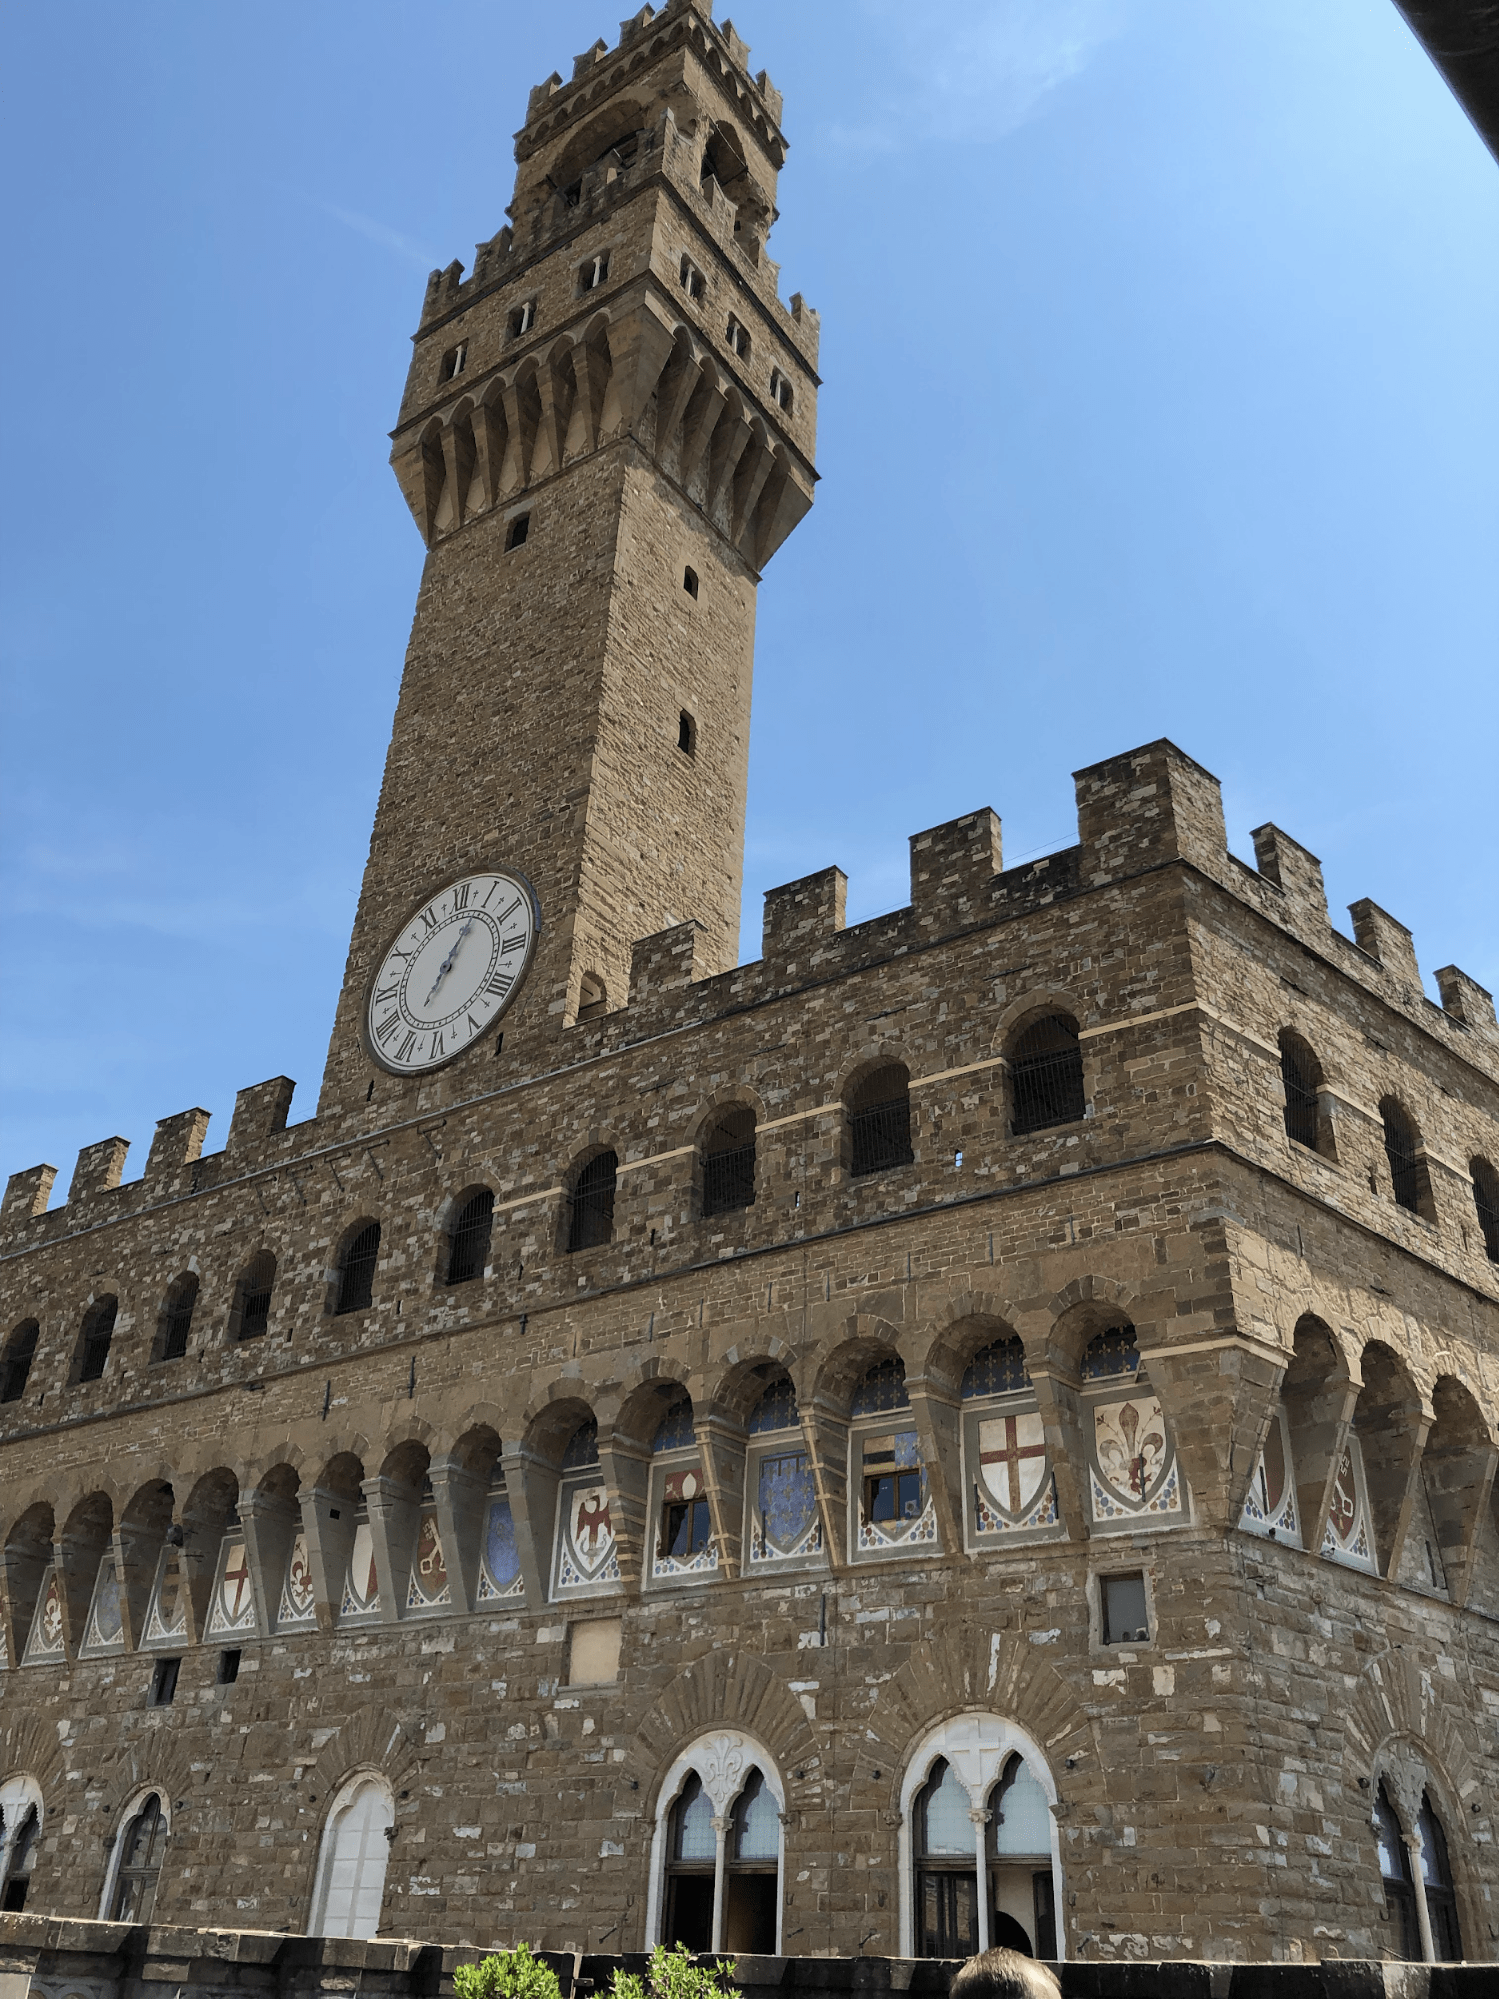 Palazzo Vecchio in Florence Italy